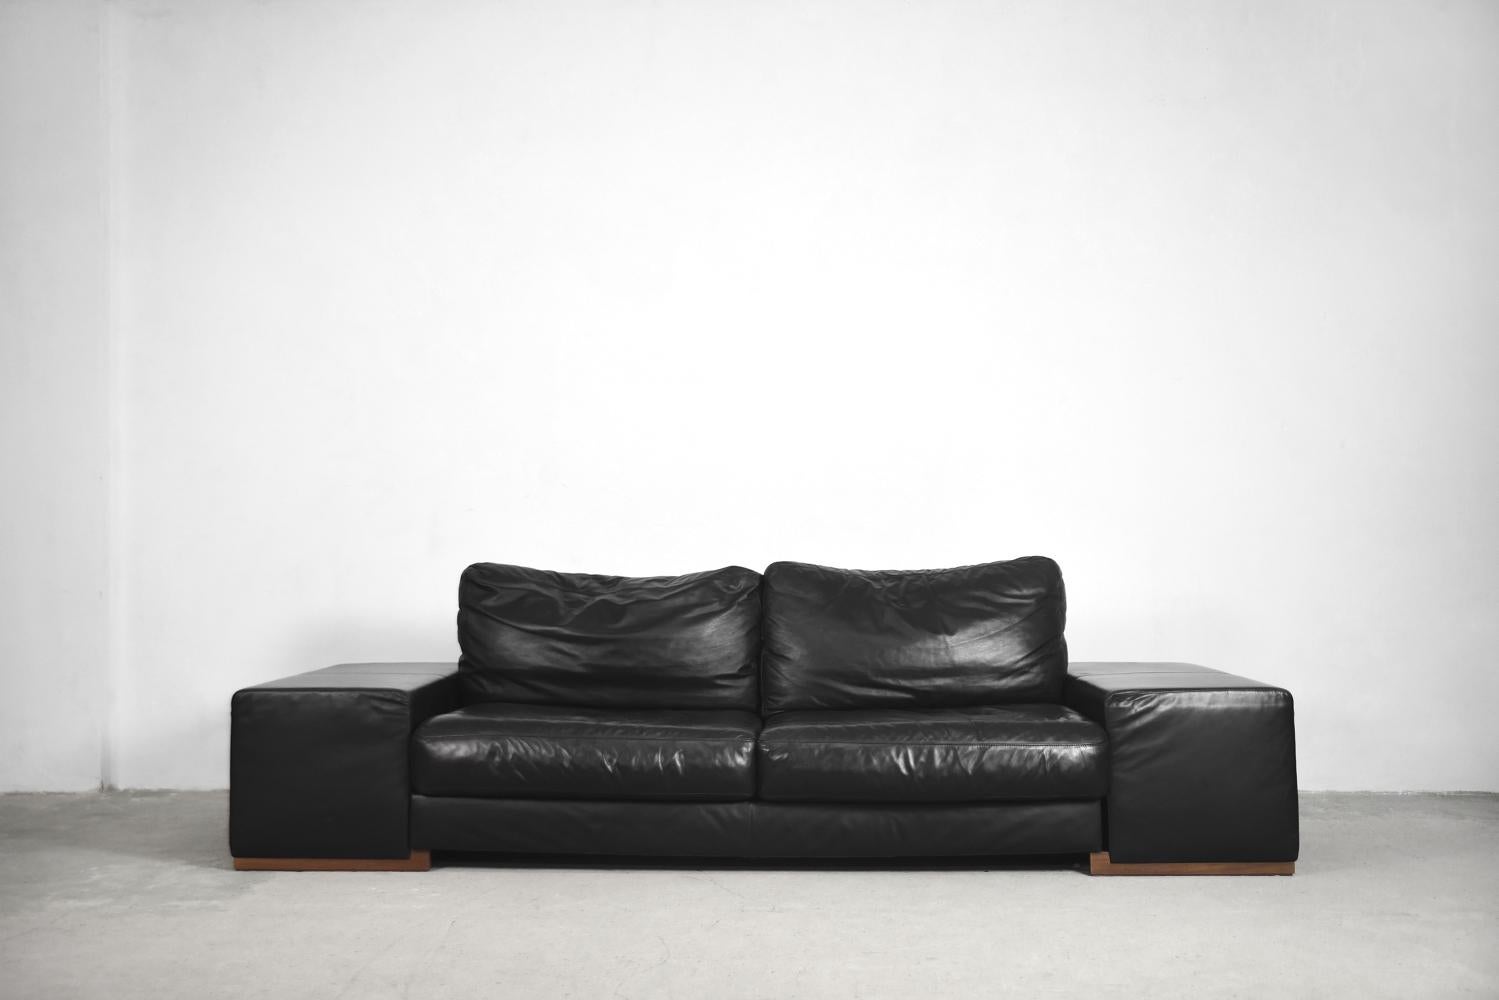 20th Century Modernist Elegant Black Leather Italian Sofa with Modules by Natuzzi For Sale